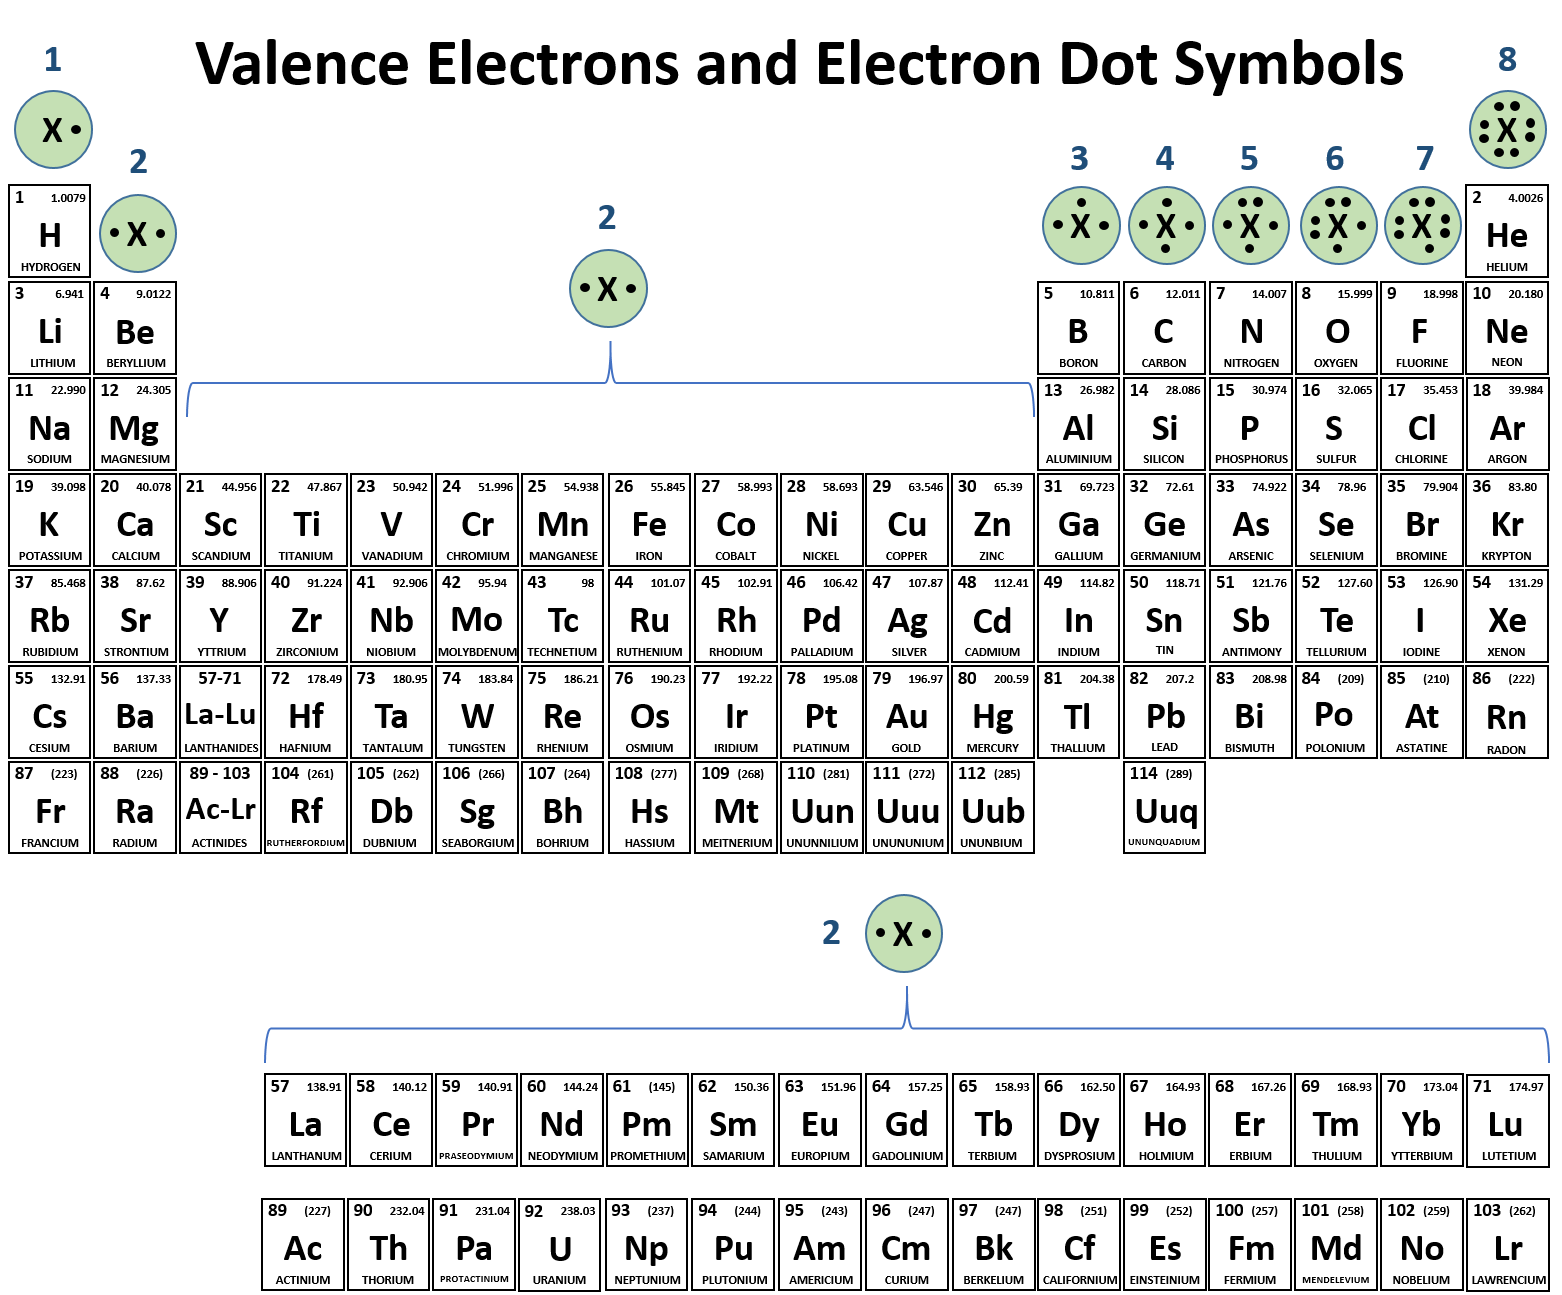 <p>Elements that have a valence which that together add up to 8 would be most likely to form ionic bonds with each other. For example, a Sodium with one valence electron would want to give its electrons away to an element such as Chlorine with 7 valence electrons, since Chlorine wants 1 more valence electron to reach 8 and become stable.</p>